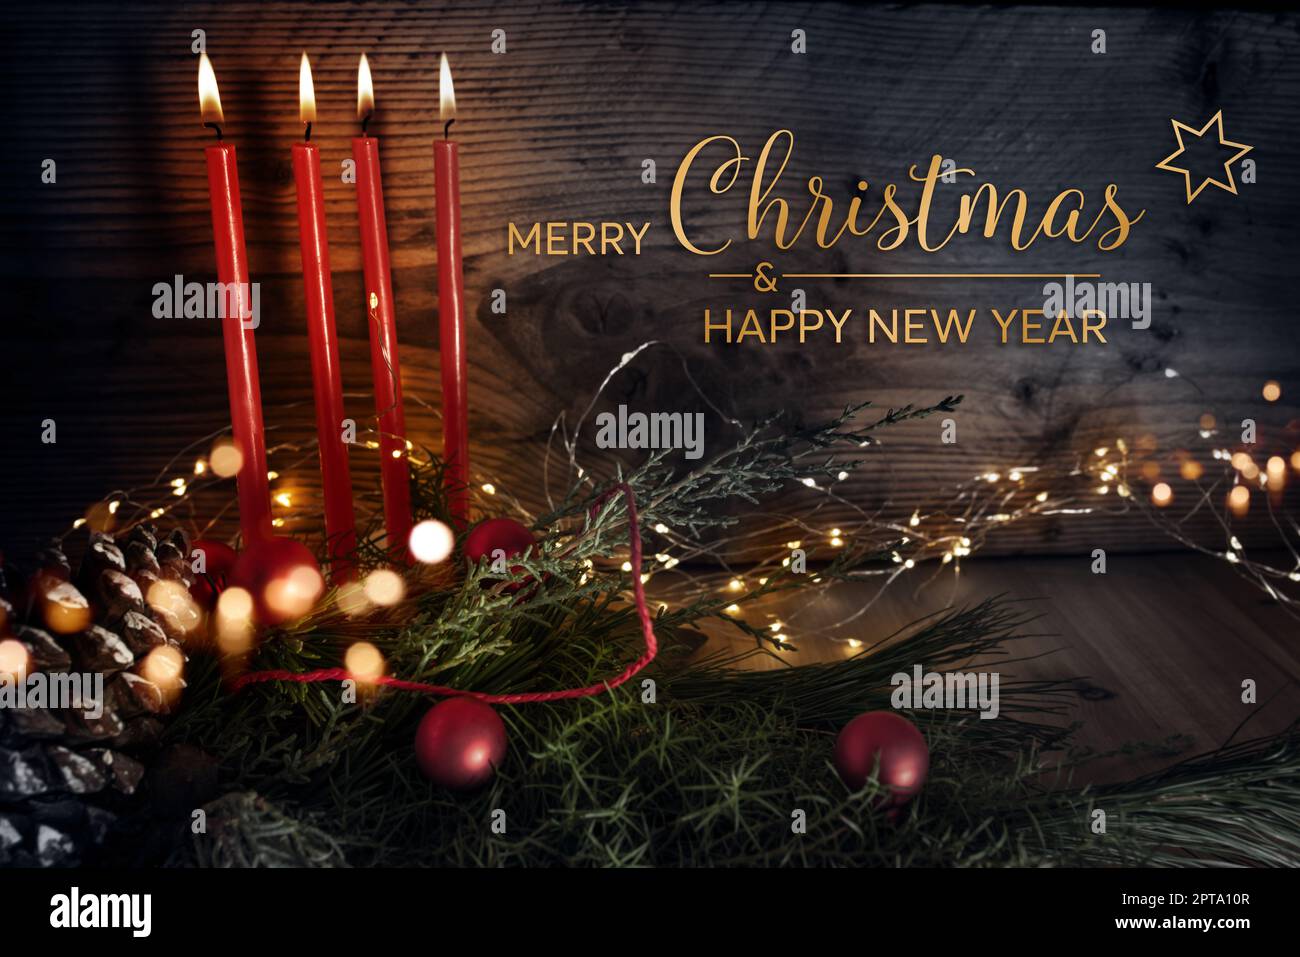 Christmas greeting card with english text - merry christmas and a happy new year - four red burning candles with natural decoration on rustic wood and Stock Photo